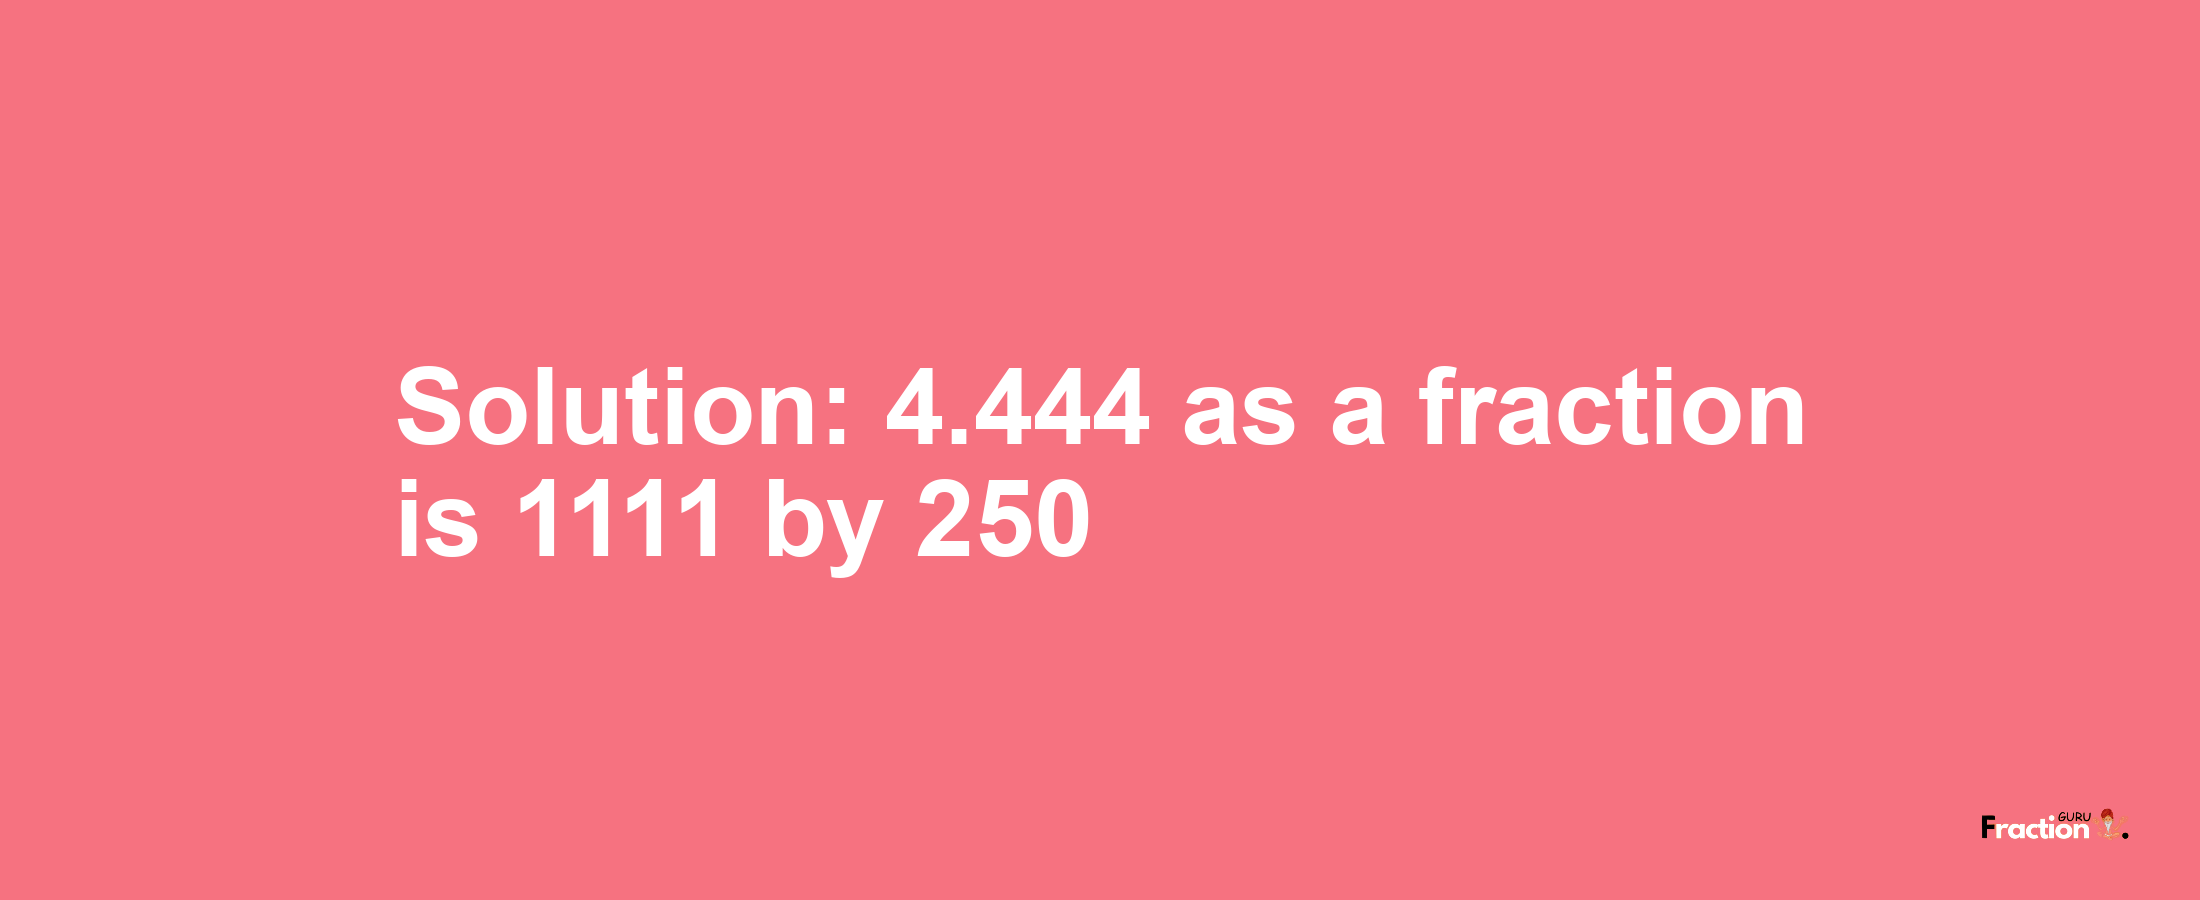 Solution:4.444 as a fraction is 1111/250